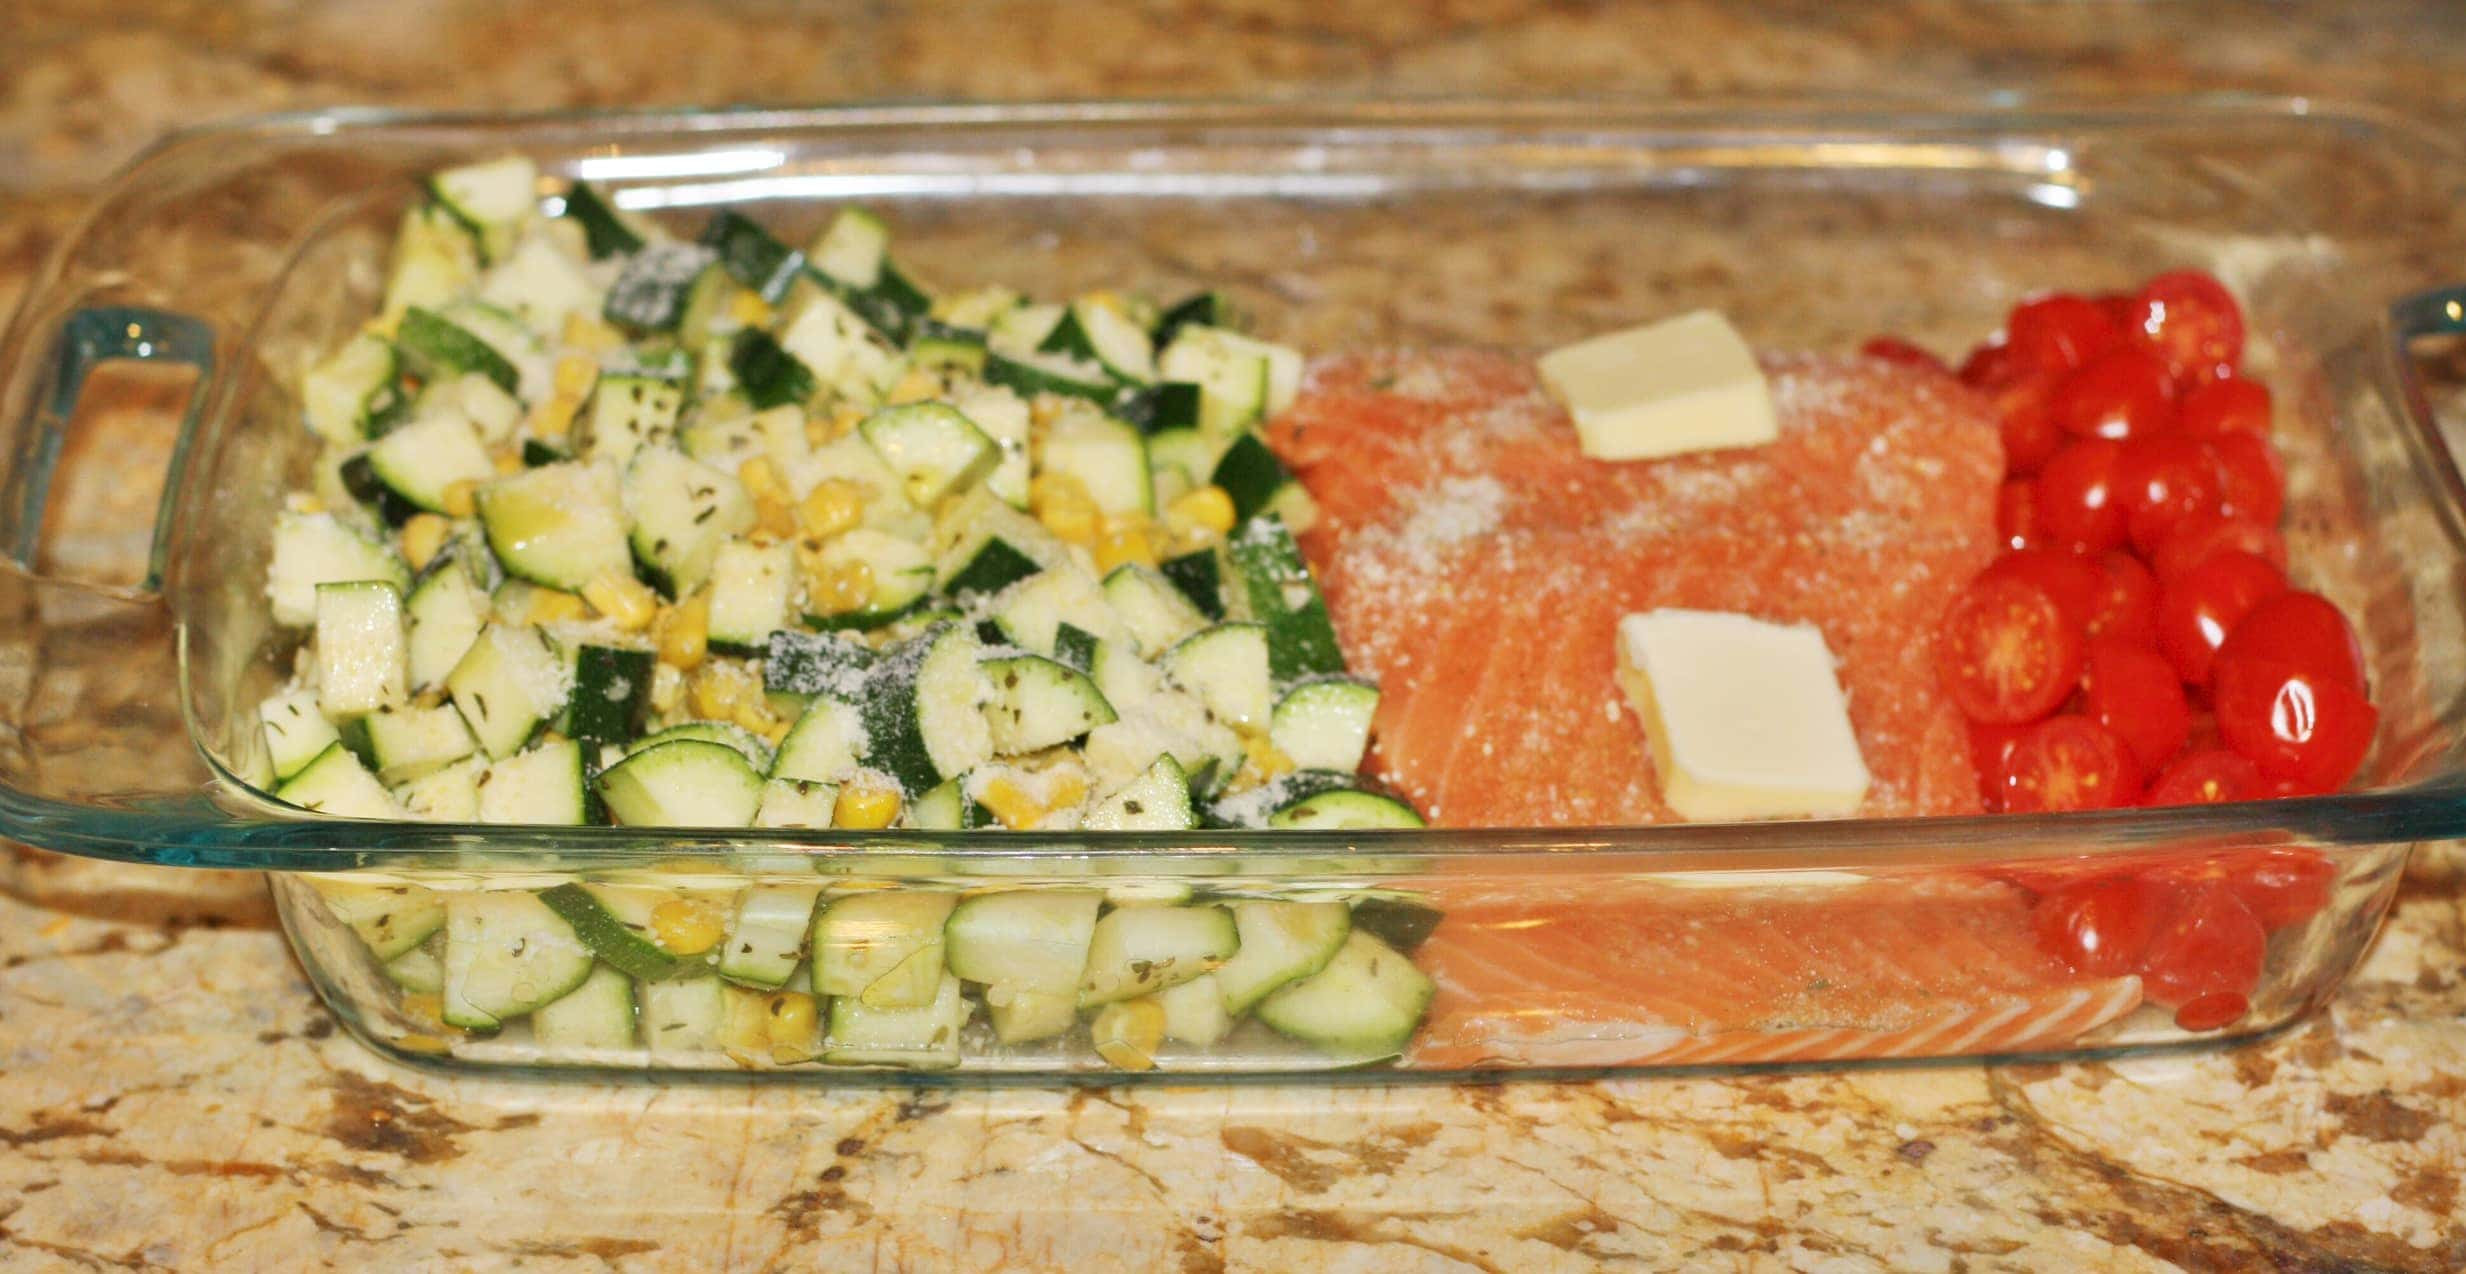 Healthy Side Dishes For Salmon
 Yummy and Healthy Salmon Dinner • REFASHIONABLY LATE